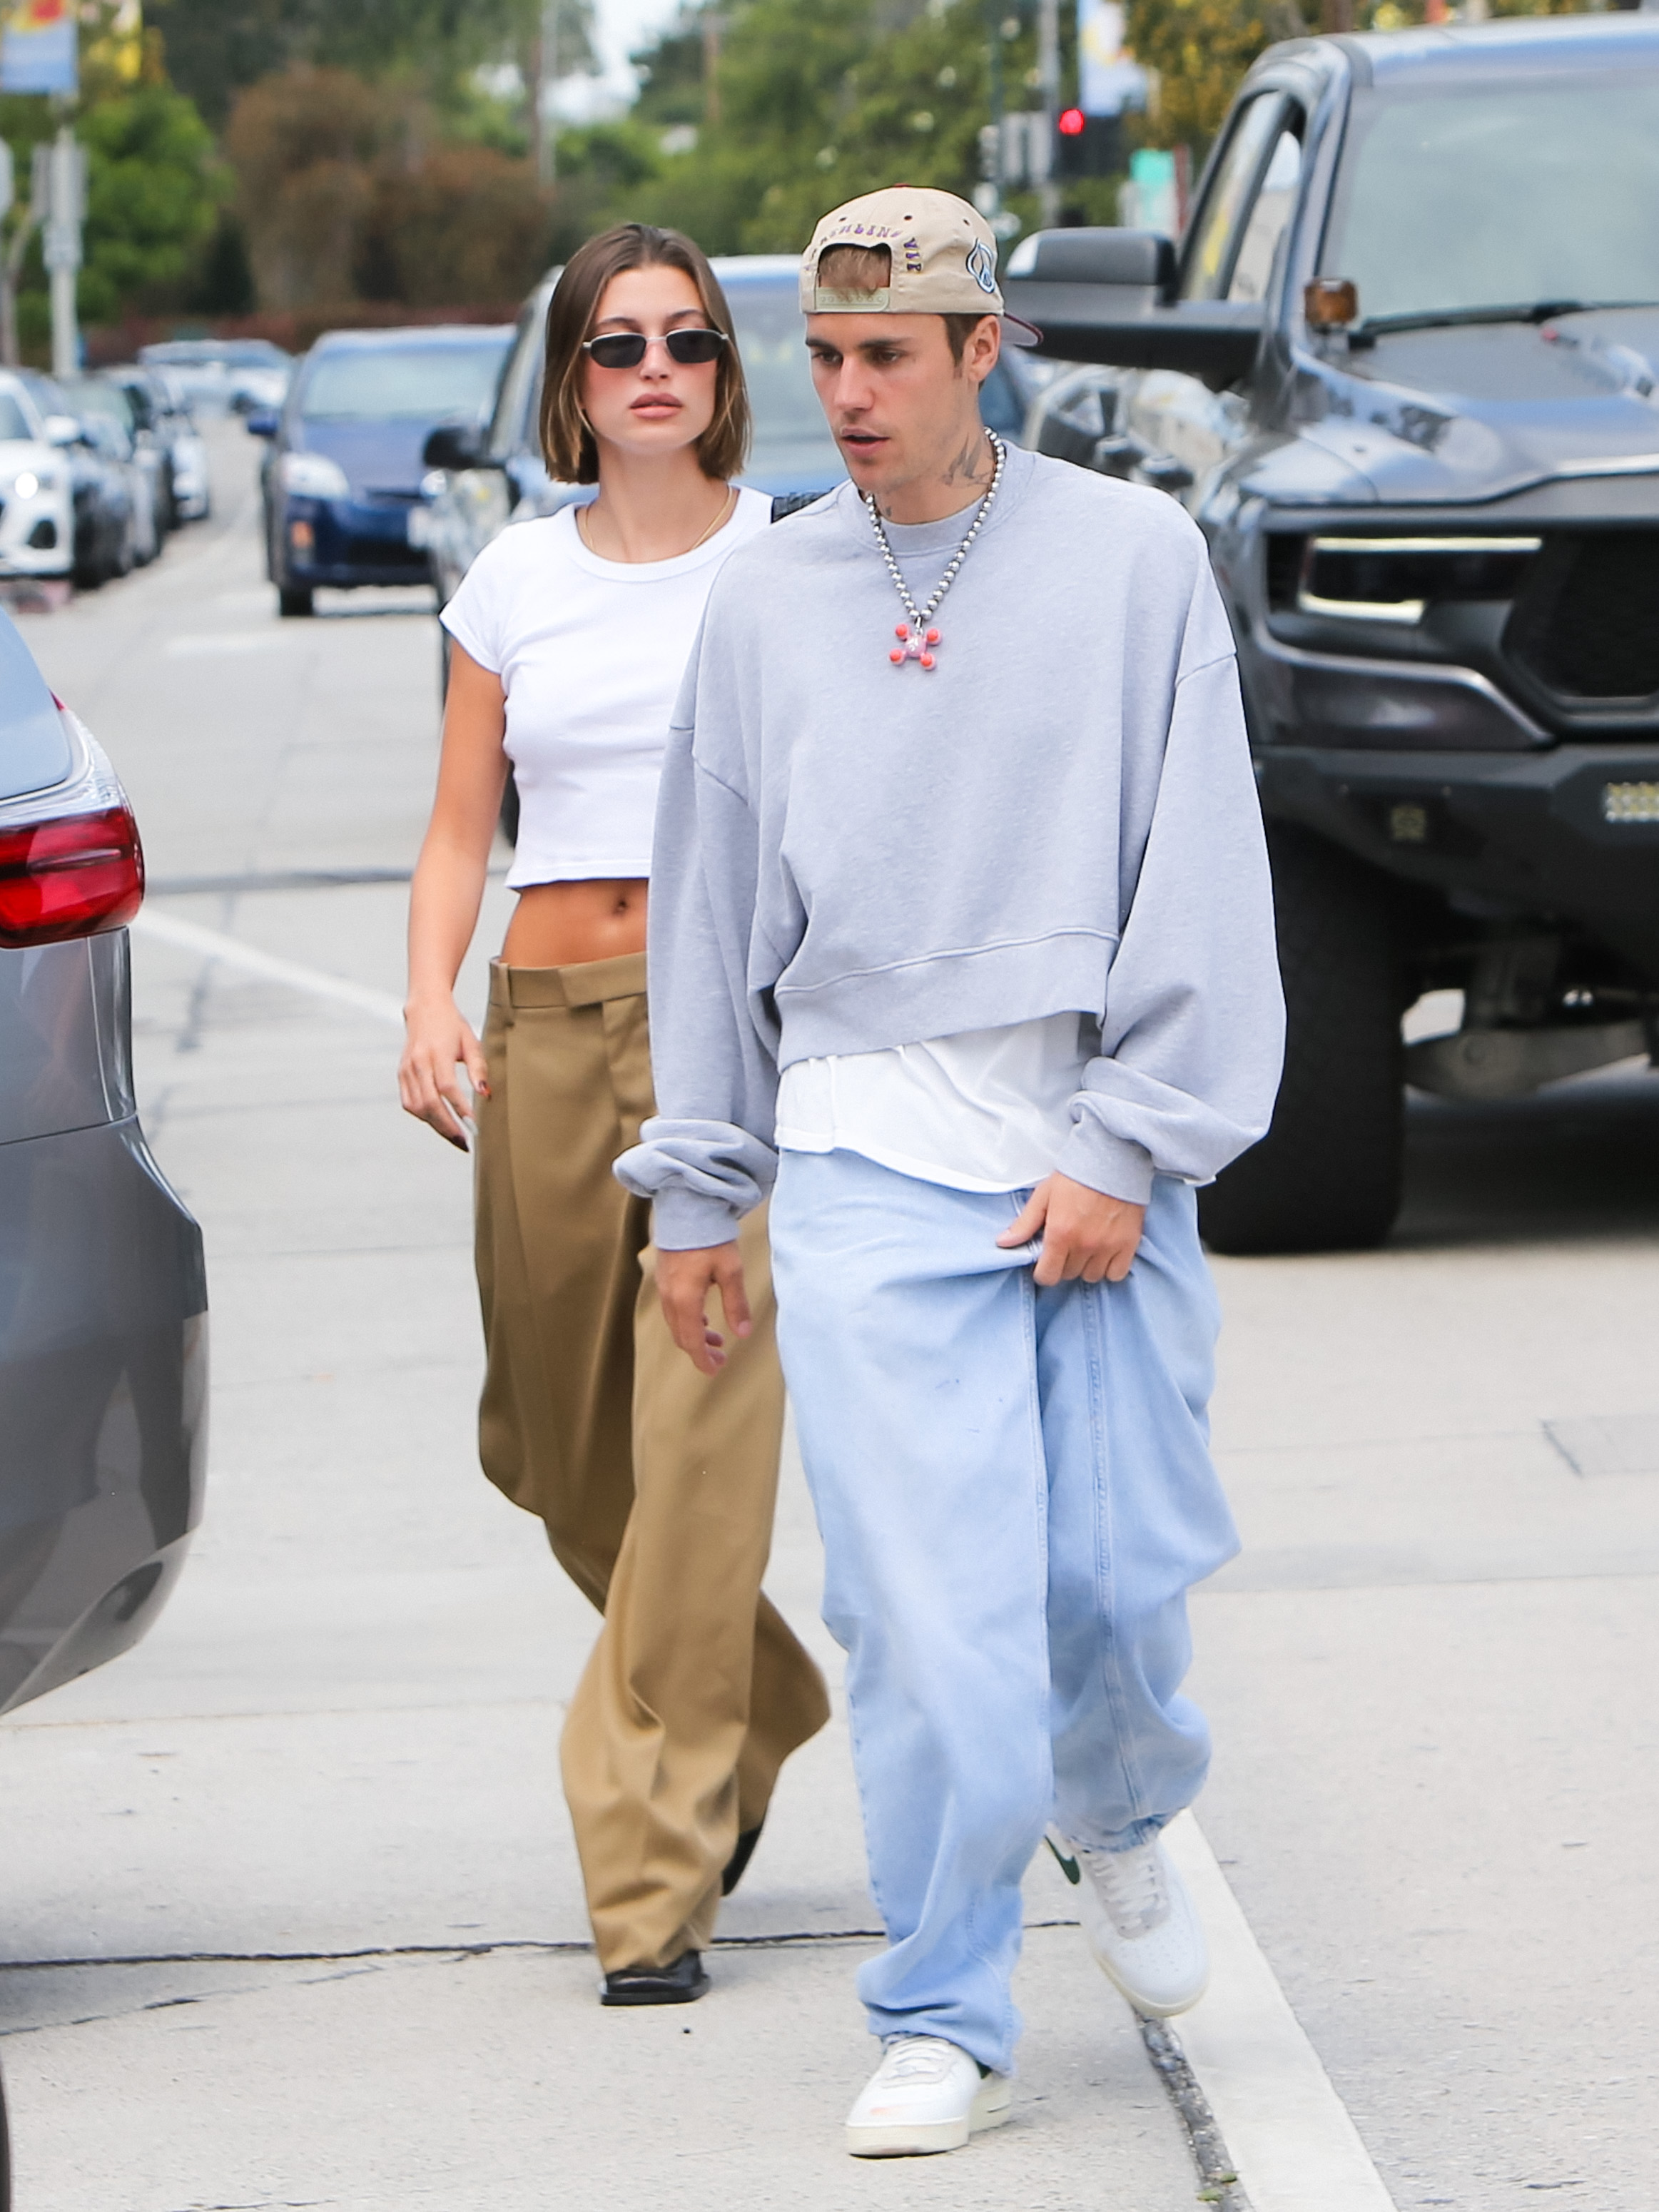 Above, the couple were spotted in LA as Hailey wore a cropped top and pants while Justin wore a pullover and jeans